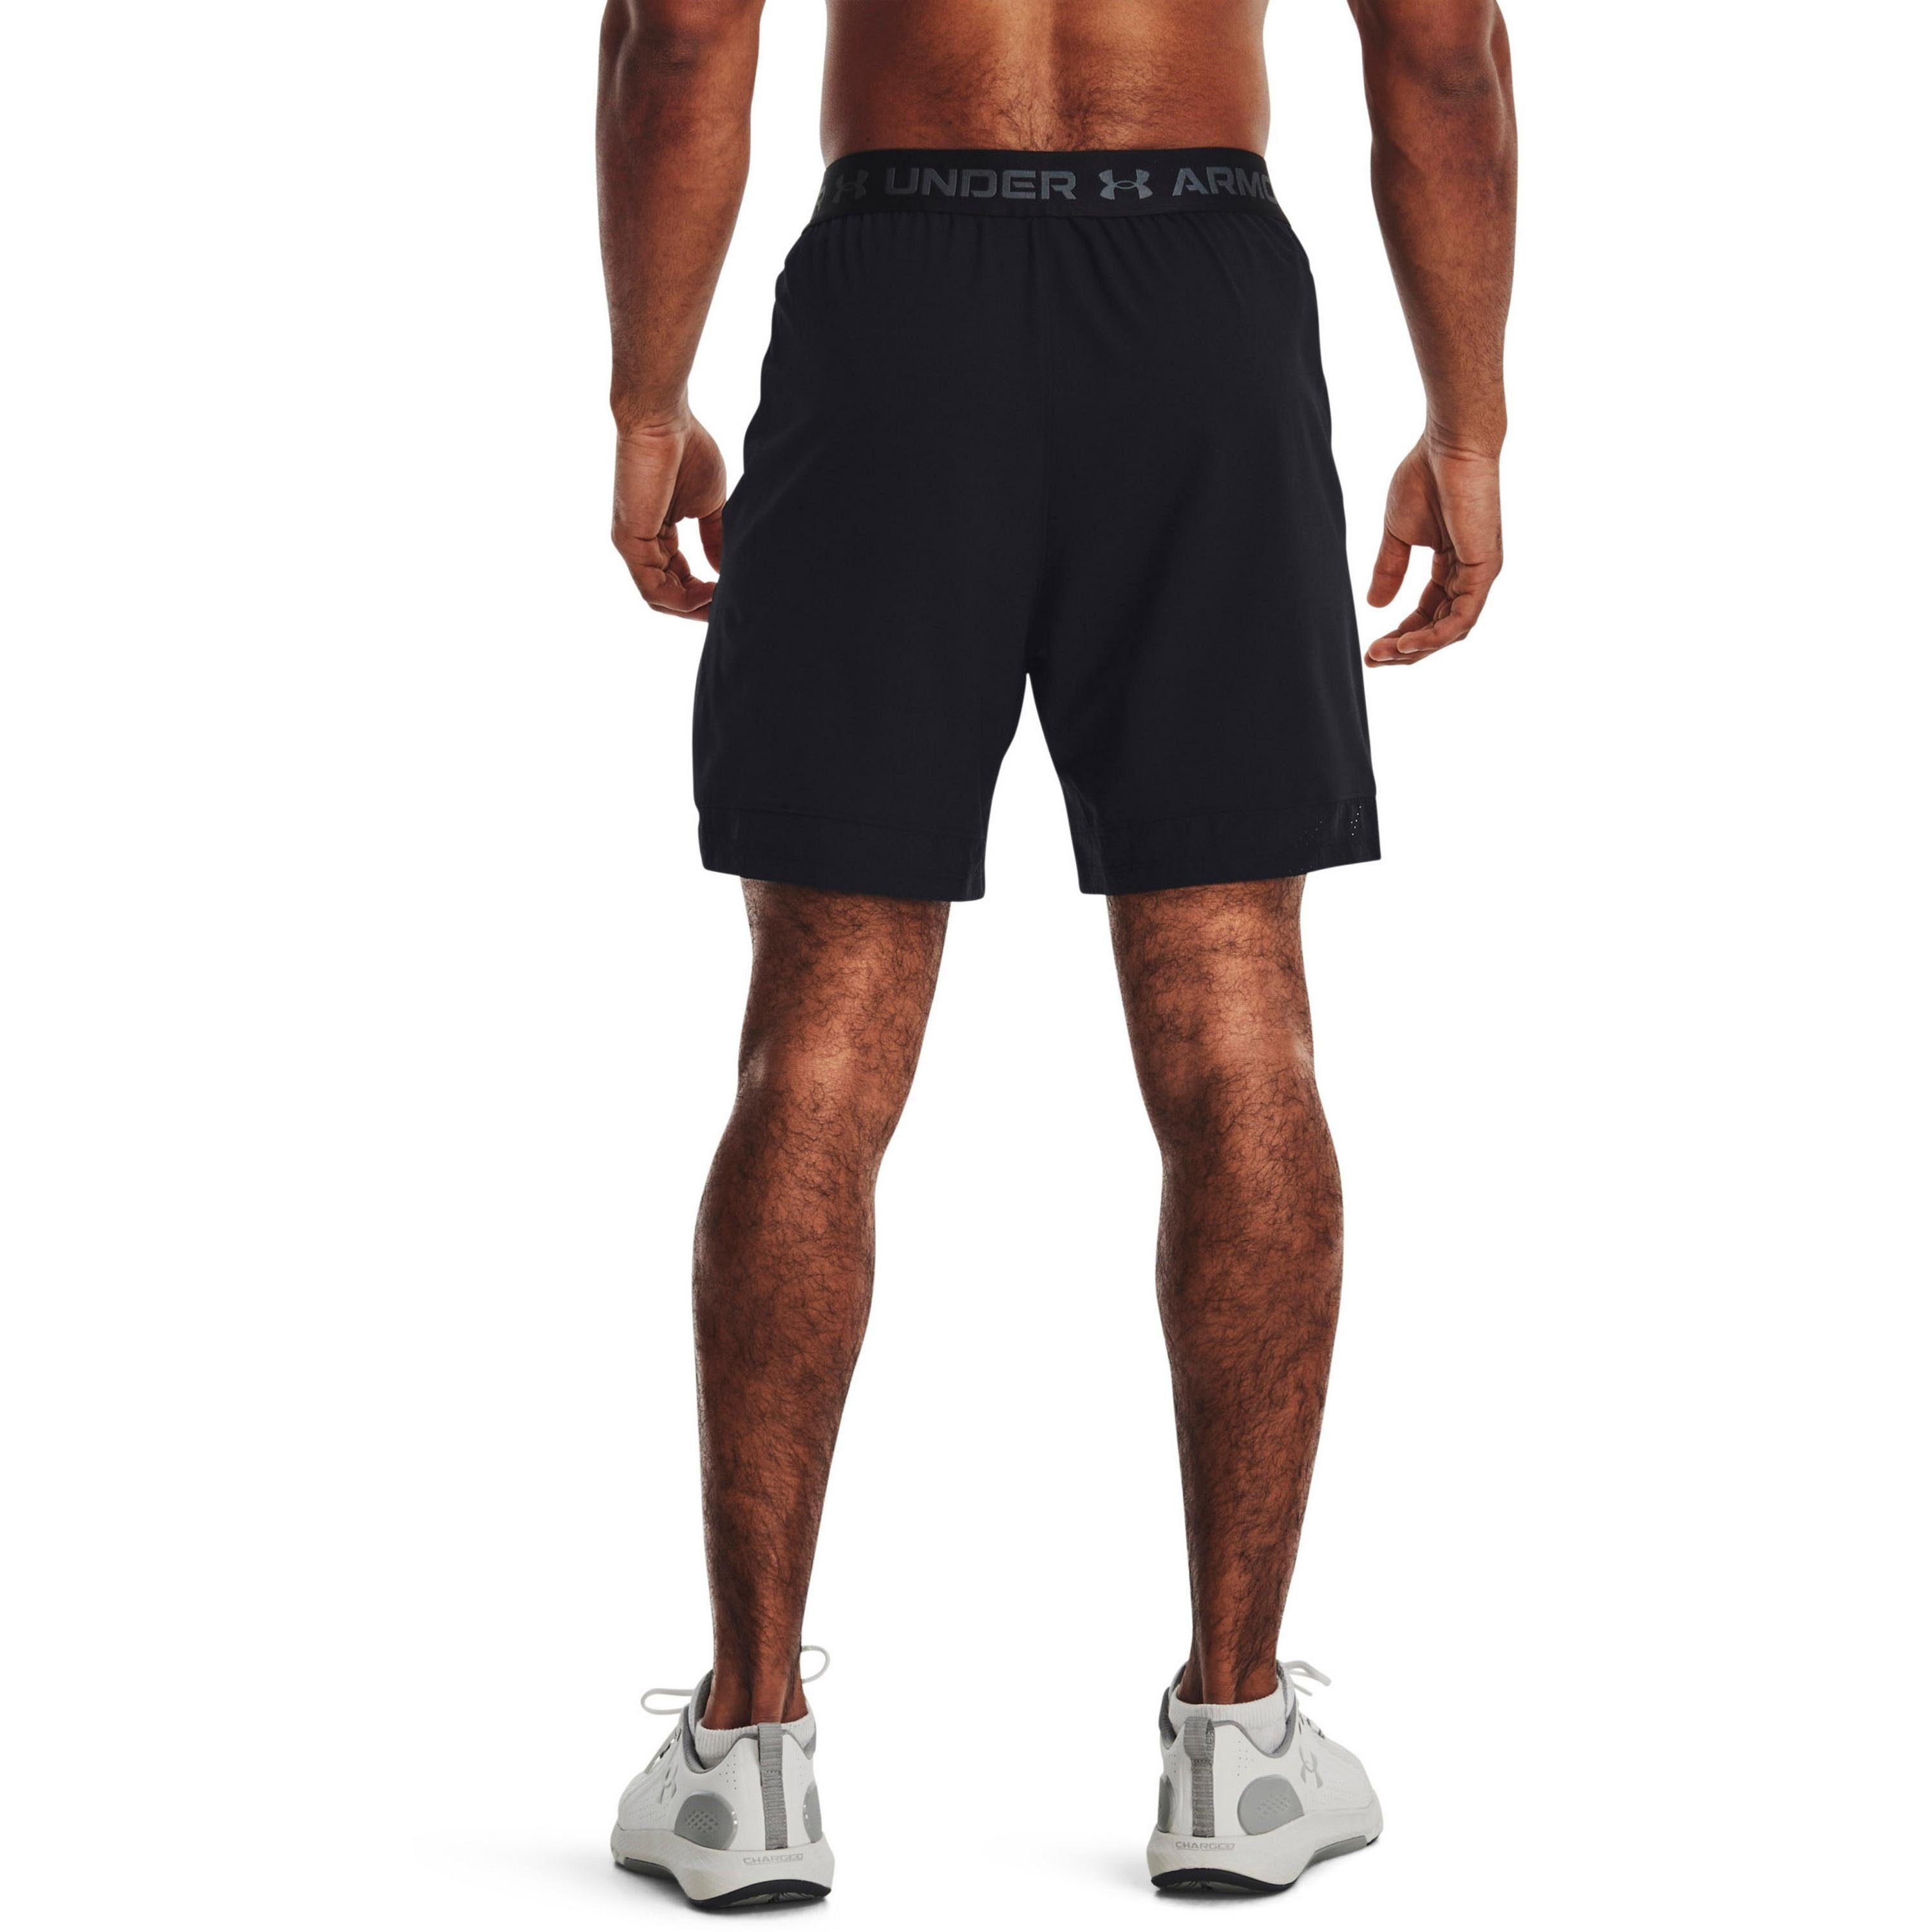 Under Funktionsshorts black-pitch Vanish gray Armour®